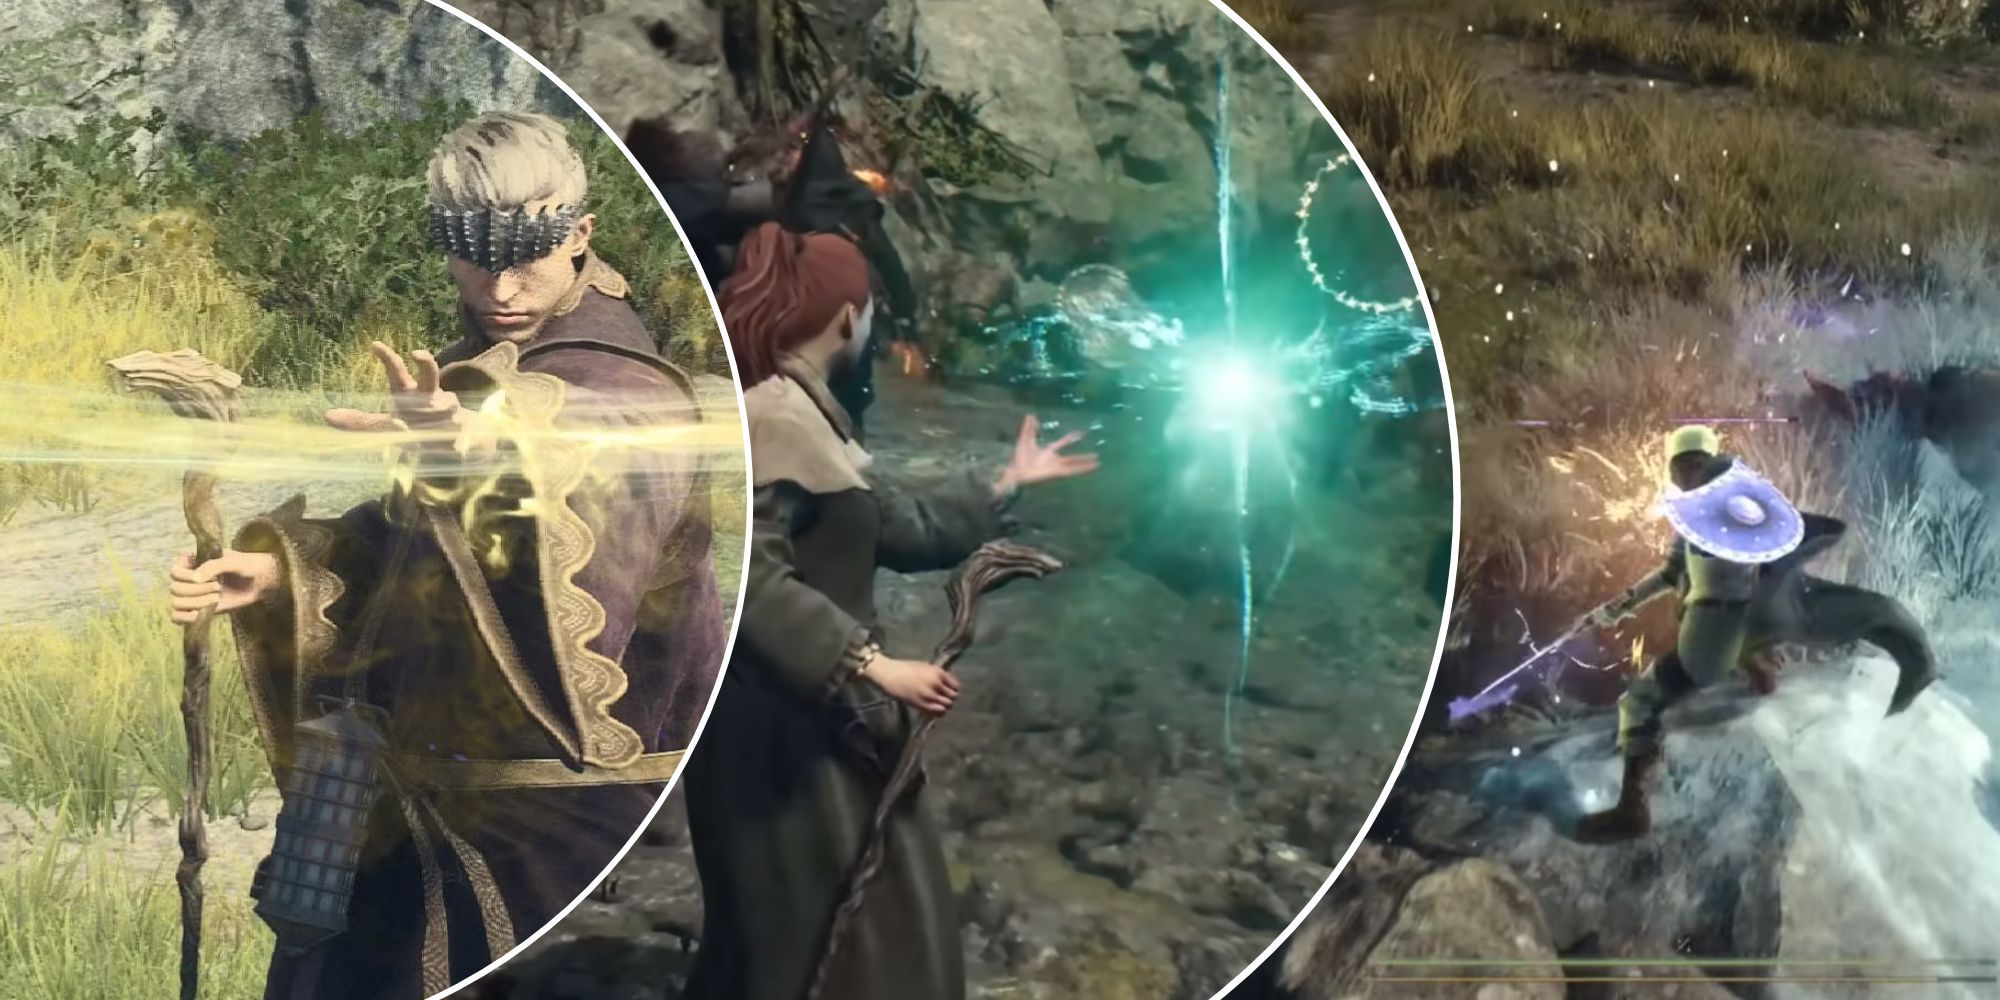 A split image featuring mage, fighter and sorcerer in action from Dragon's Dogma 2